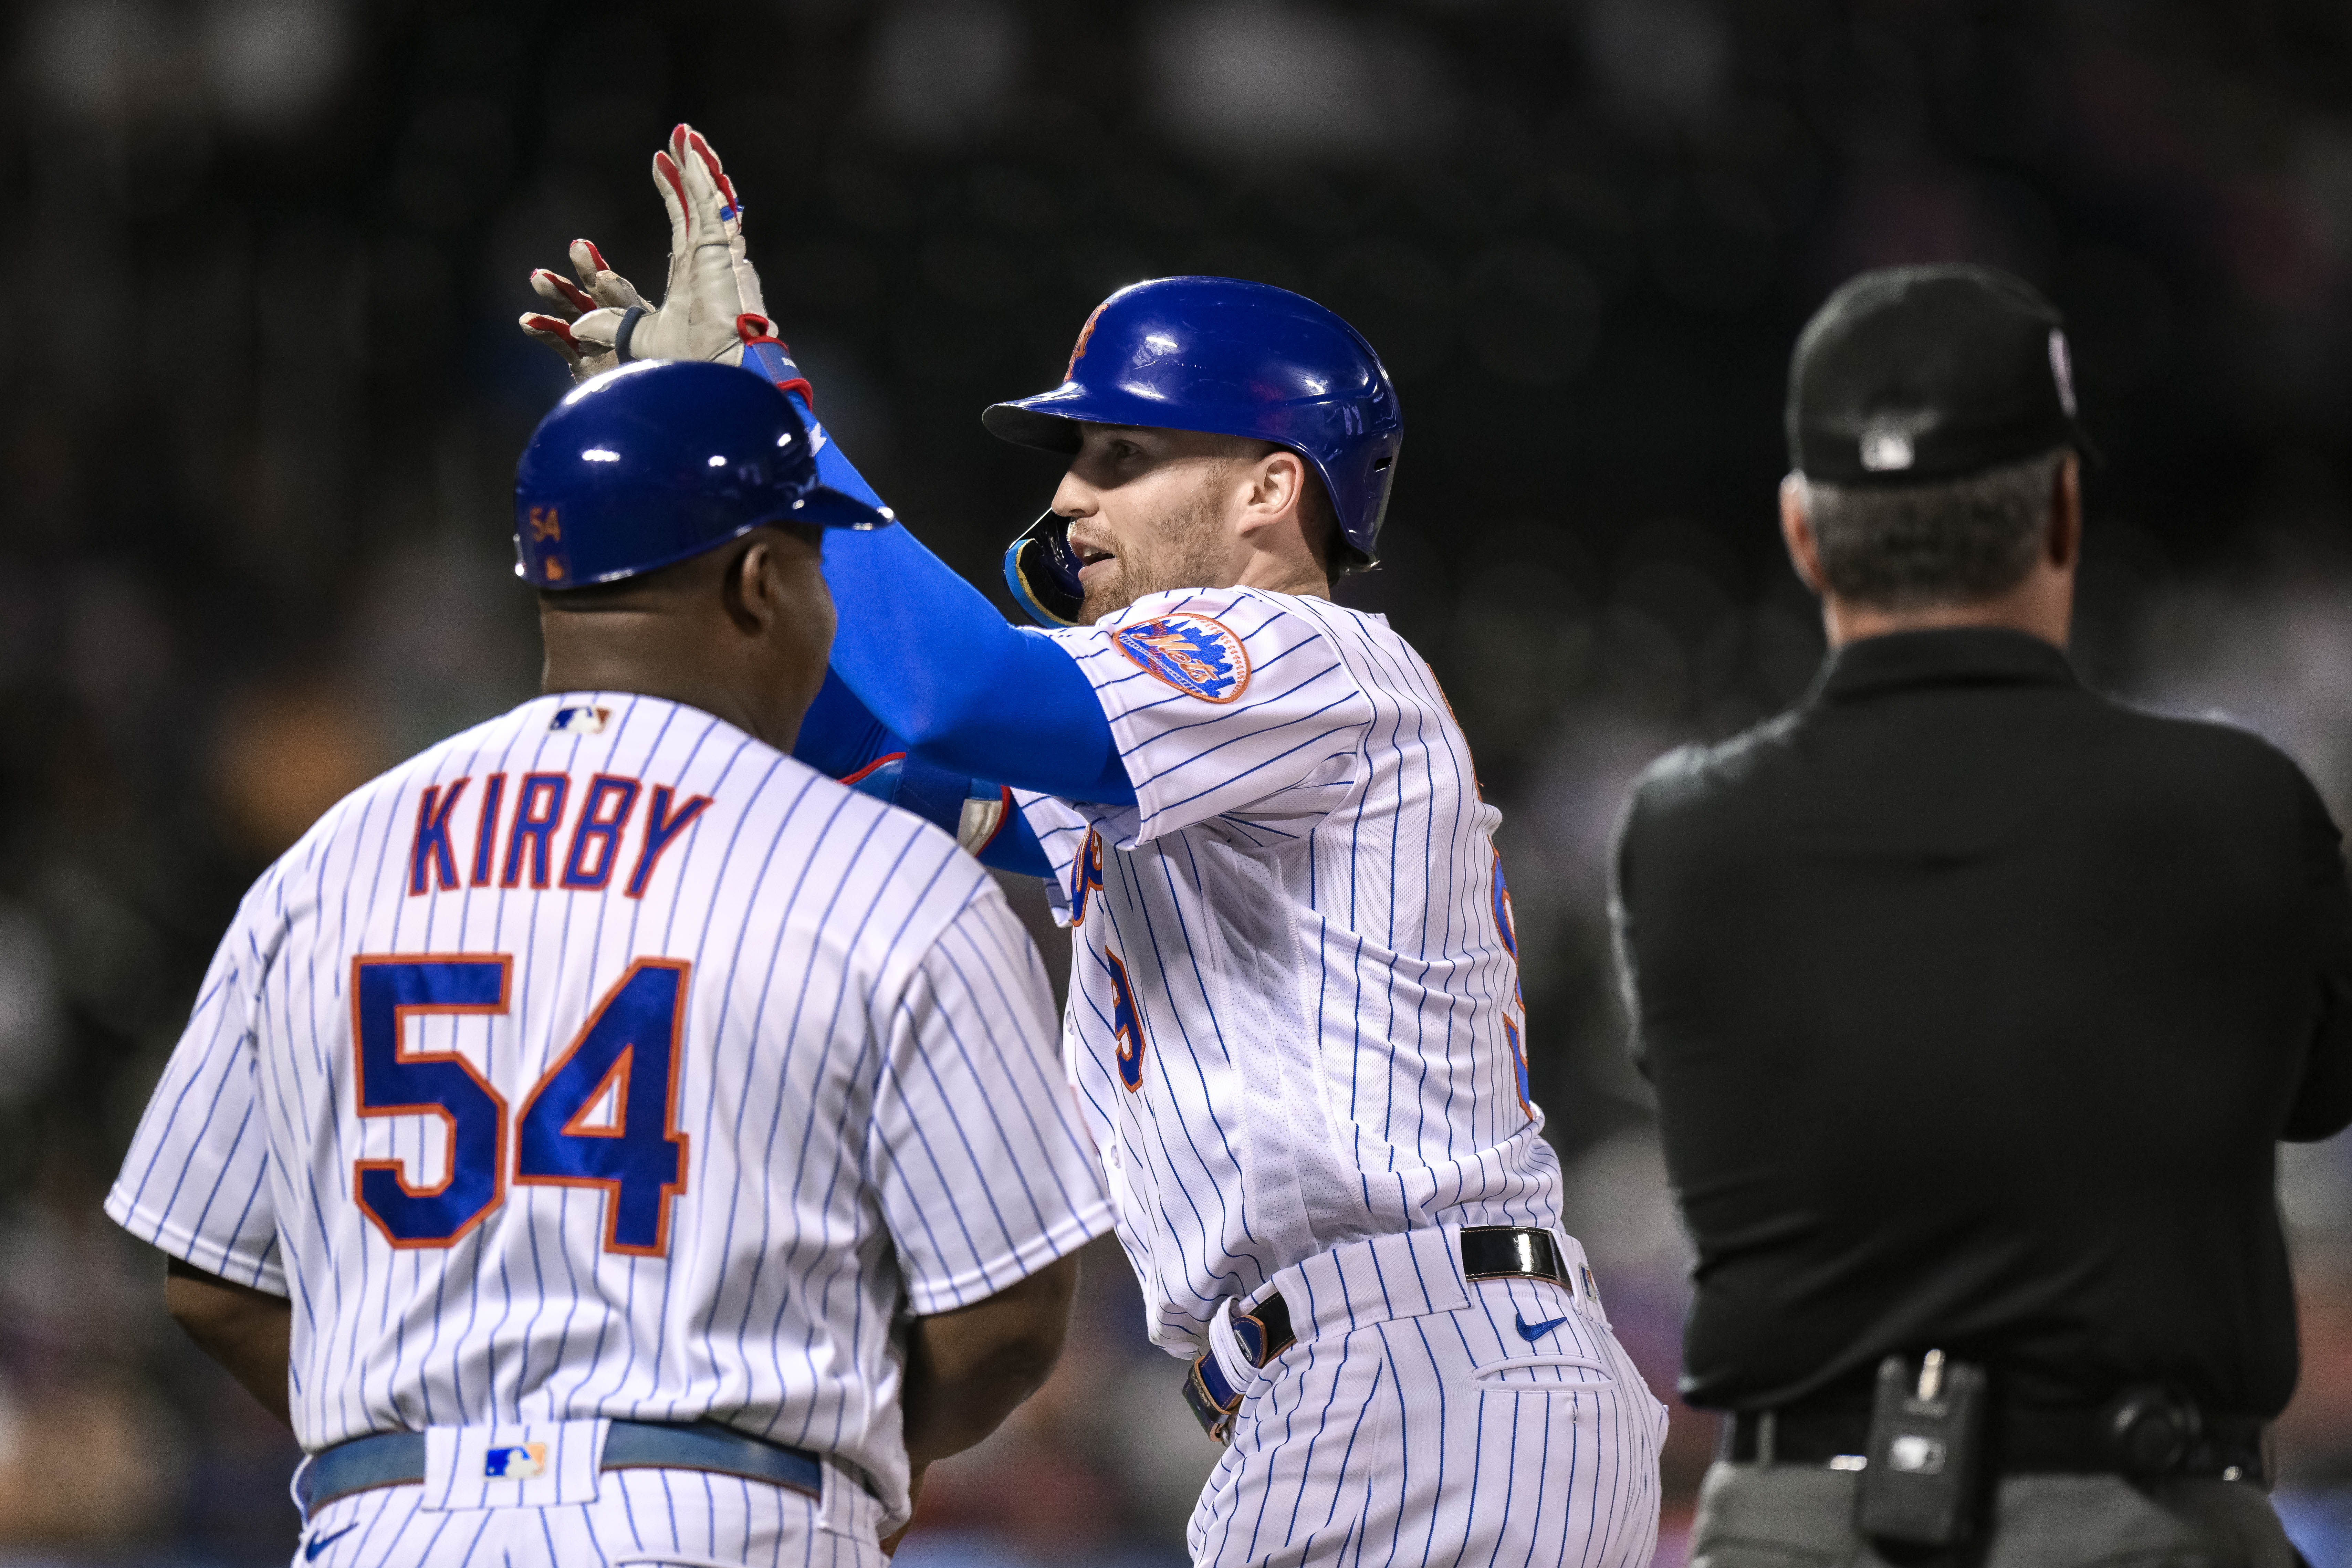 Surging Marlins aim to solve Kodai Senga, Mets - Field Level Media -  Professional sports content solutions